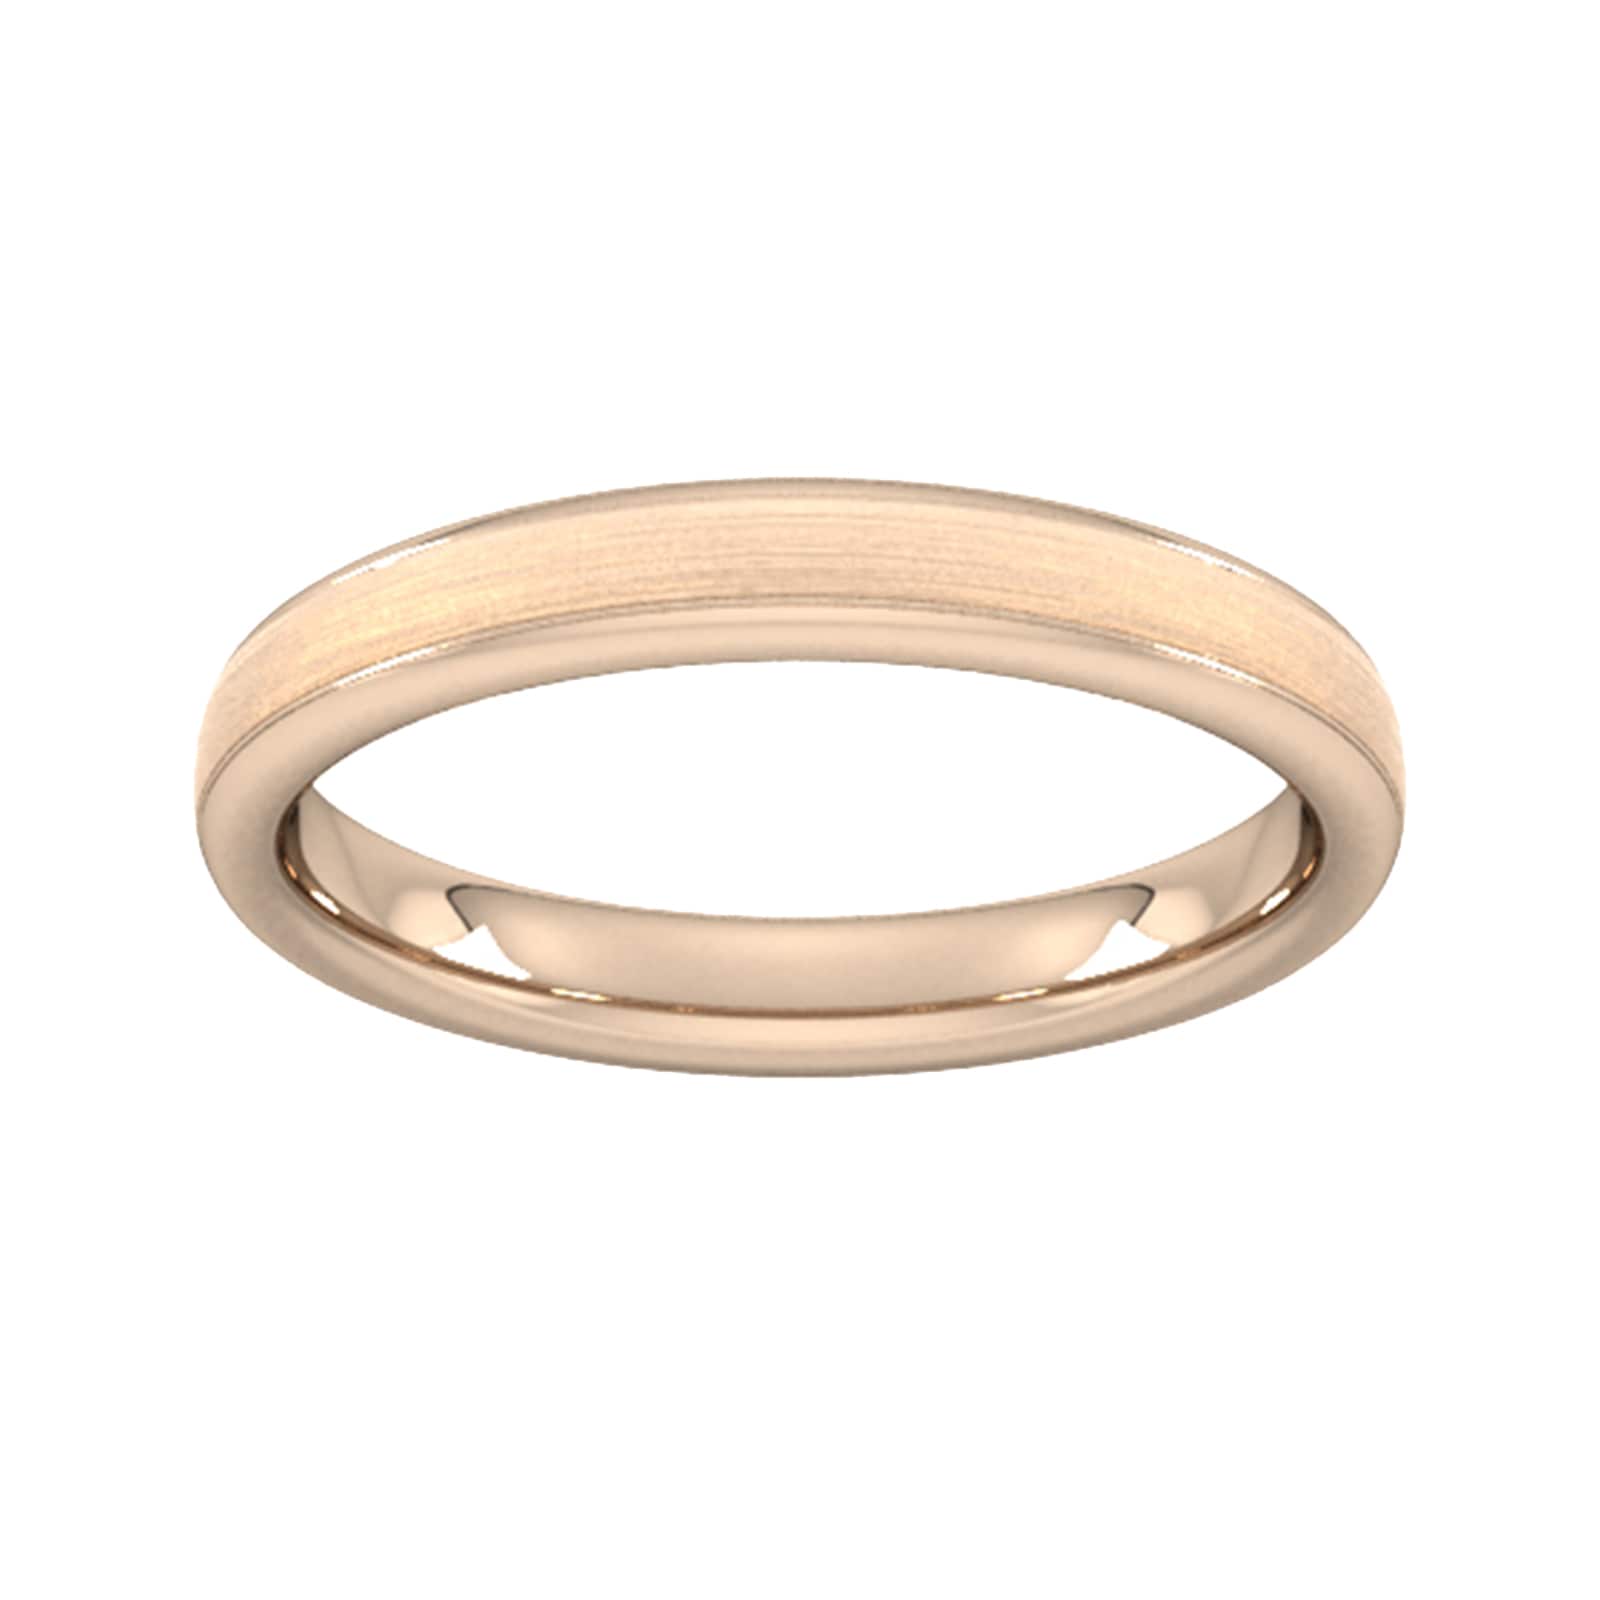 3mm Traditional Court Heavy Matt Centre With Grooves Wedding Ring In 9 Carat Rose Gold - Ring Size W